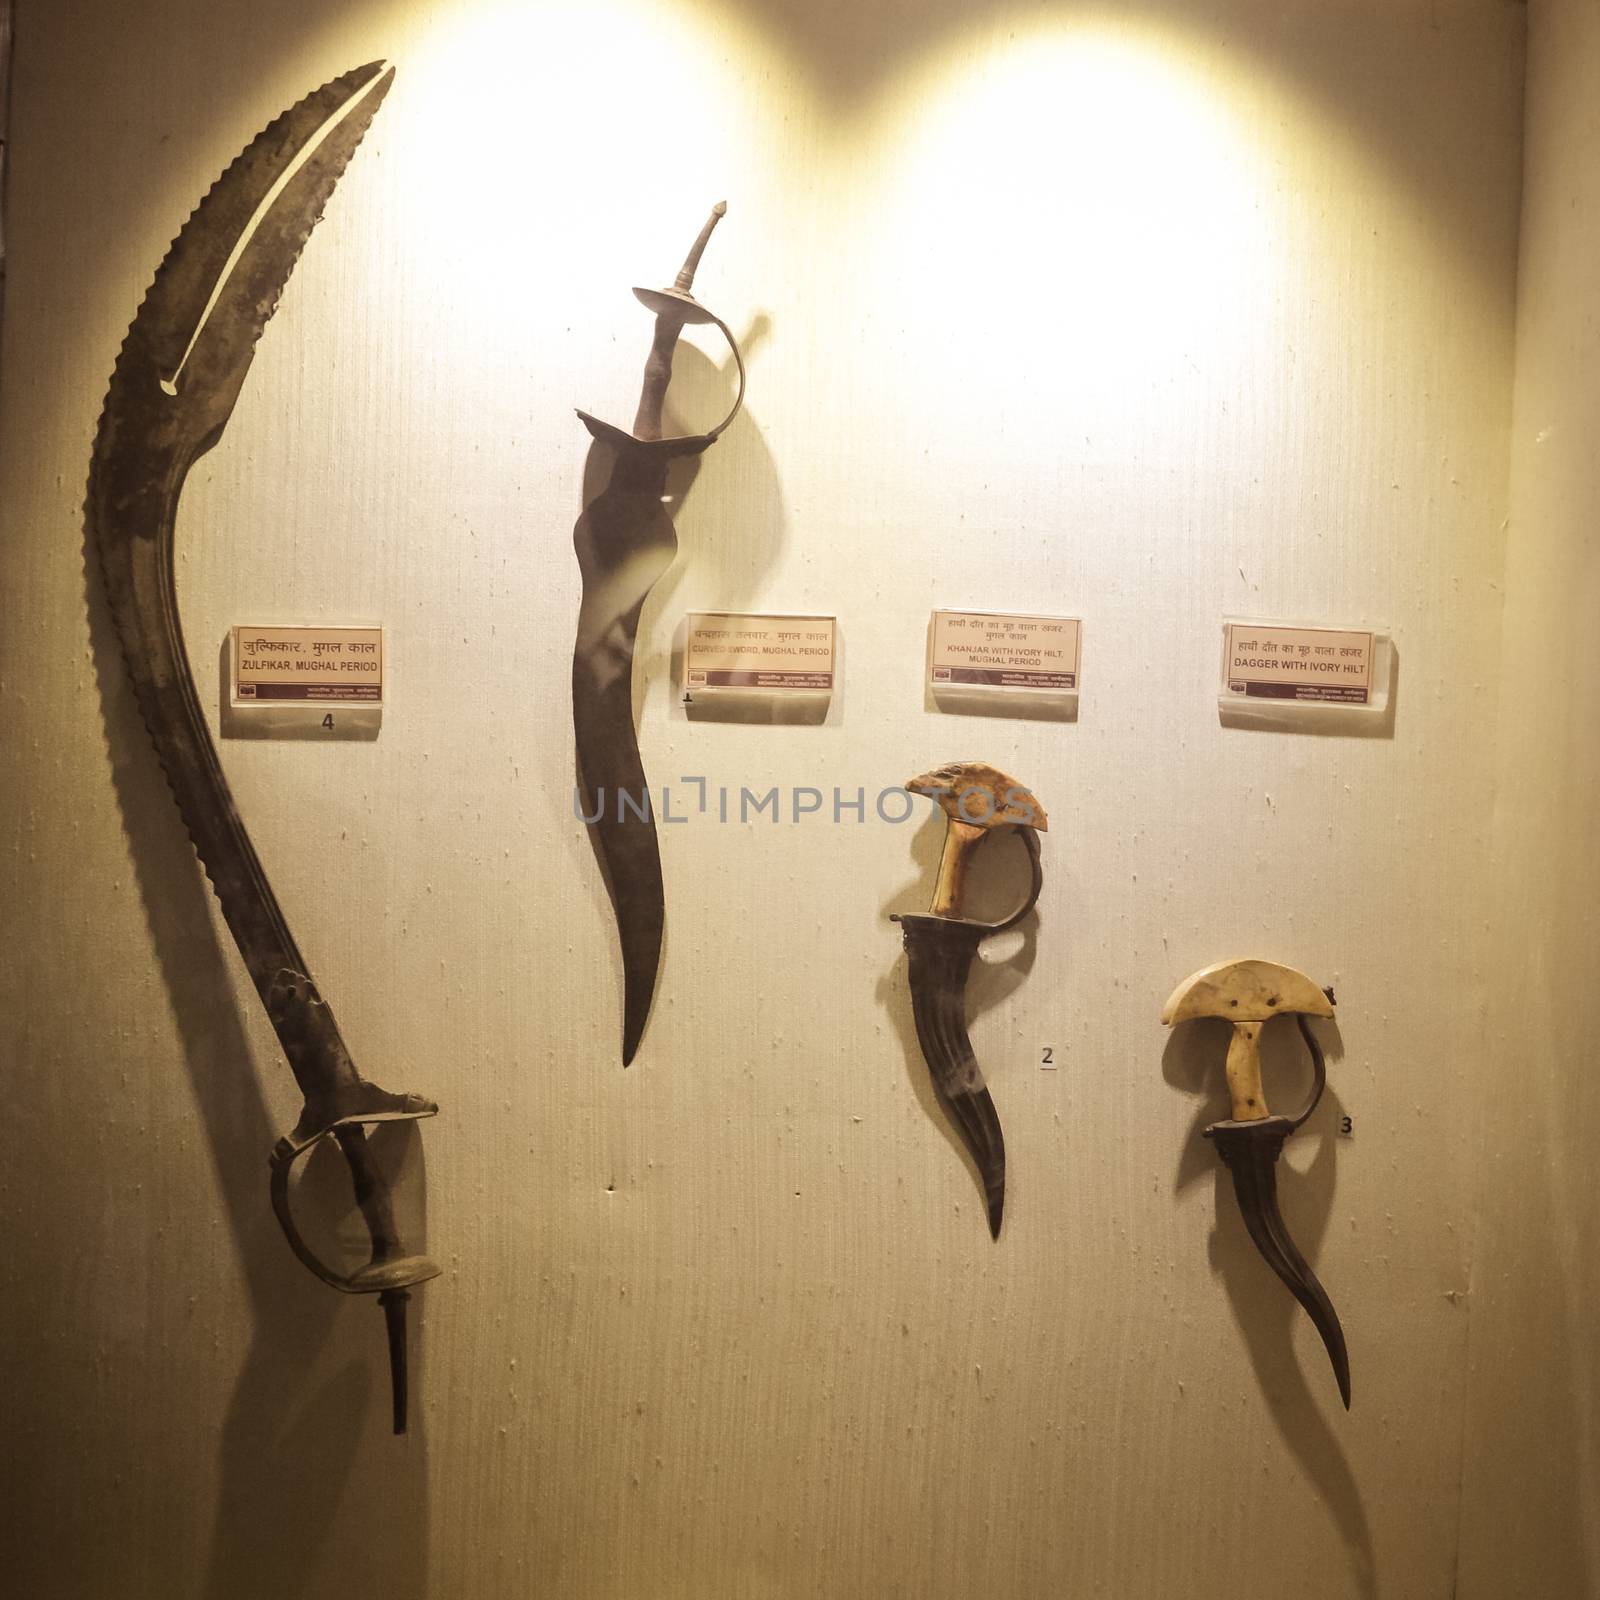 Red Fort Museum of Arms and Weapons, New Delhi, Jul 21, 2018: Arms and Weapons Showcased here in Galleries includes Arrows, Swords, Revolvers, Machine Guns, Shells, Daggers Ivory and Battle Axes. by sudiptabhowmick